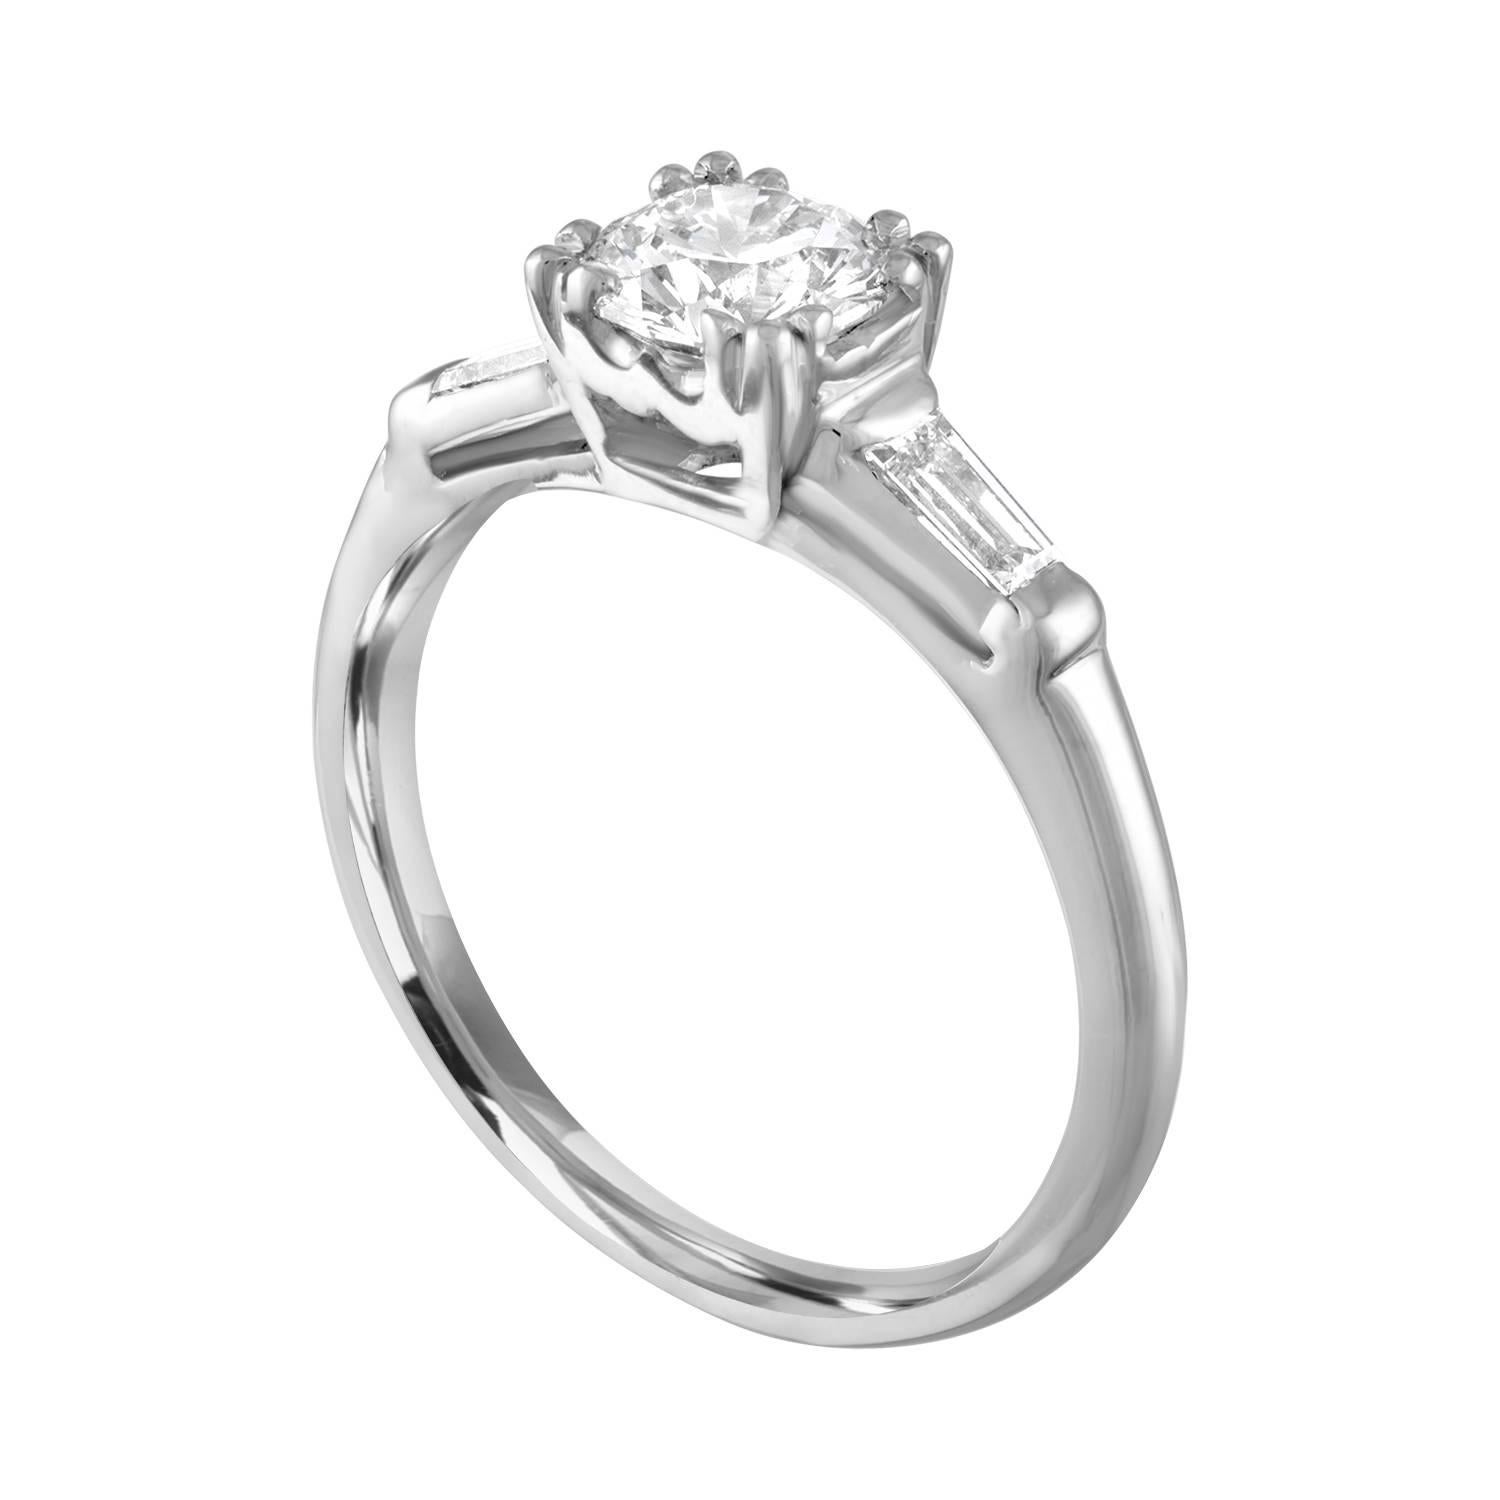 Round Shape Engagement Ring.
The ring is Platinum.
The center Stone is a Round 0.74 Carats I SI1.
There are 2 Tapered Baguettes 0.40 Carats H VS.
The ring is a size 6.00, sizable.
The ring weighs 3.4 grams.